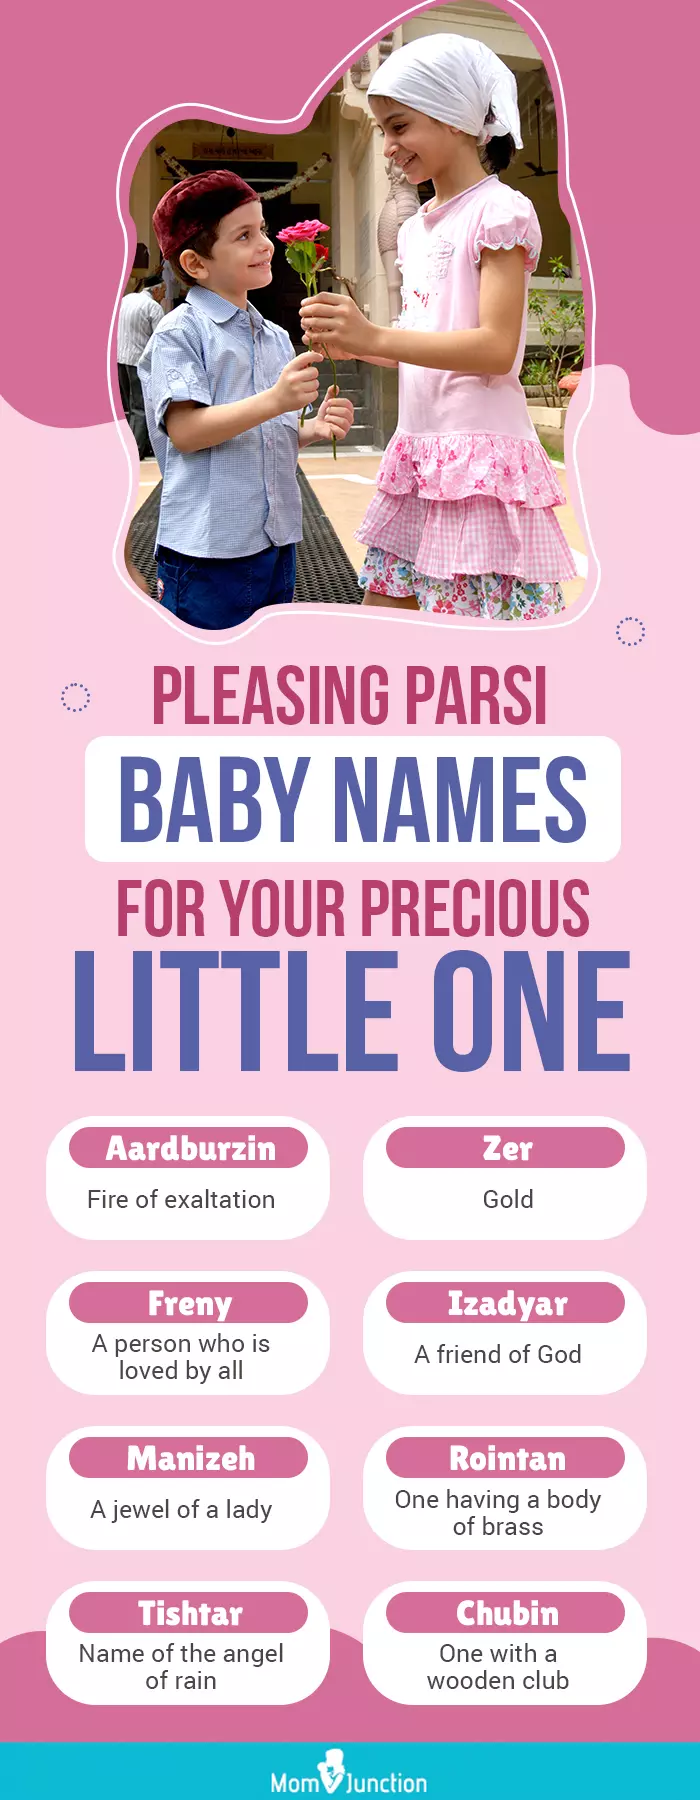 pleasing parsi baby names for your precious little one (infographic)